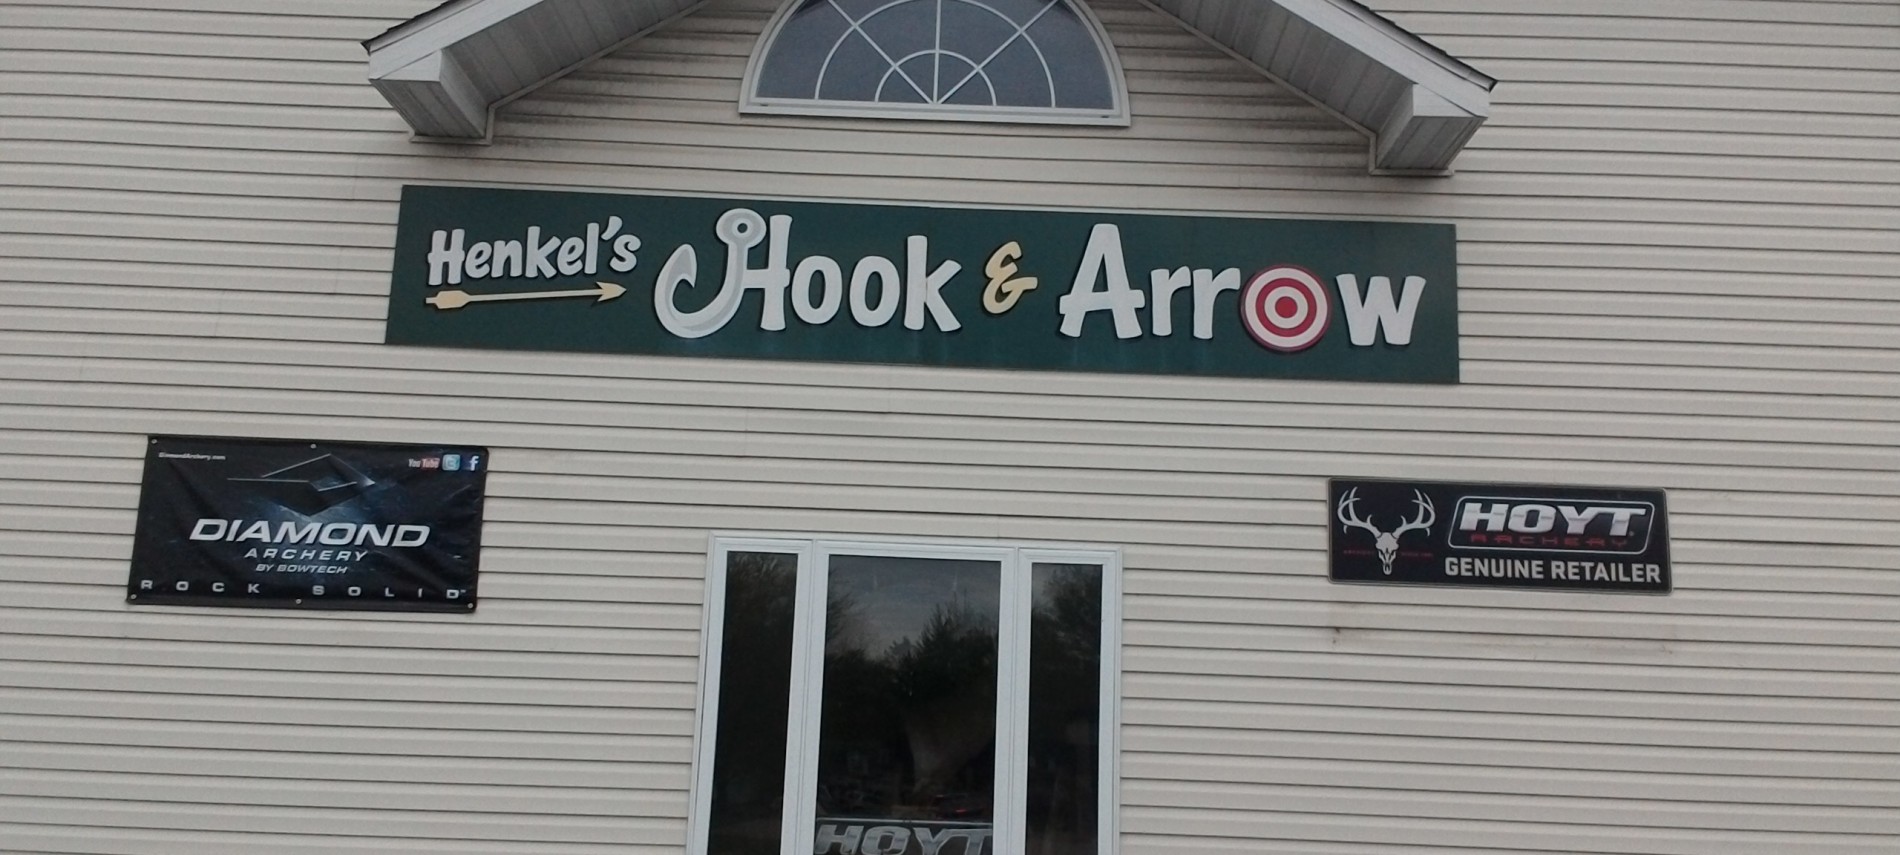 Tan sided multi-story building with Black Sign: Henkel's Hook & Arrow, sign for Diamond Archery and Hoyt Retailer.